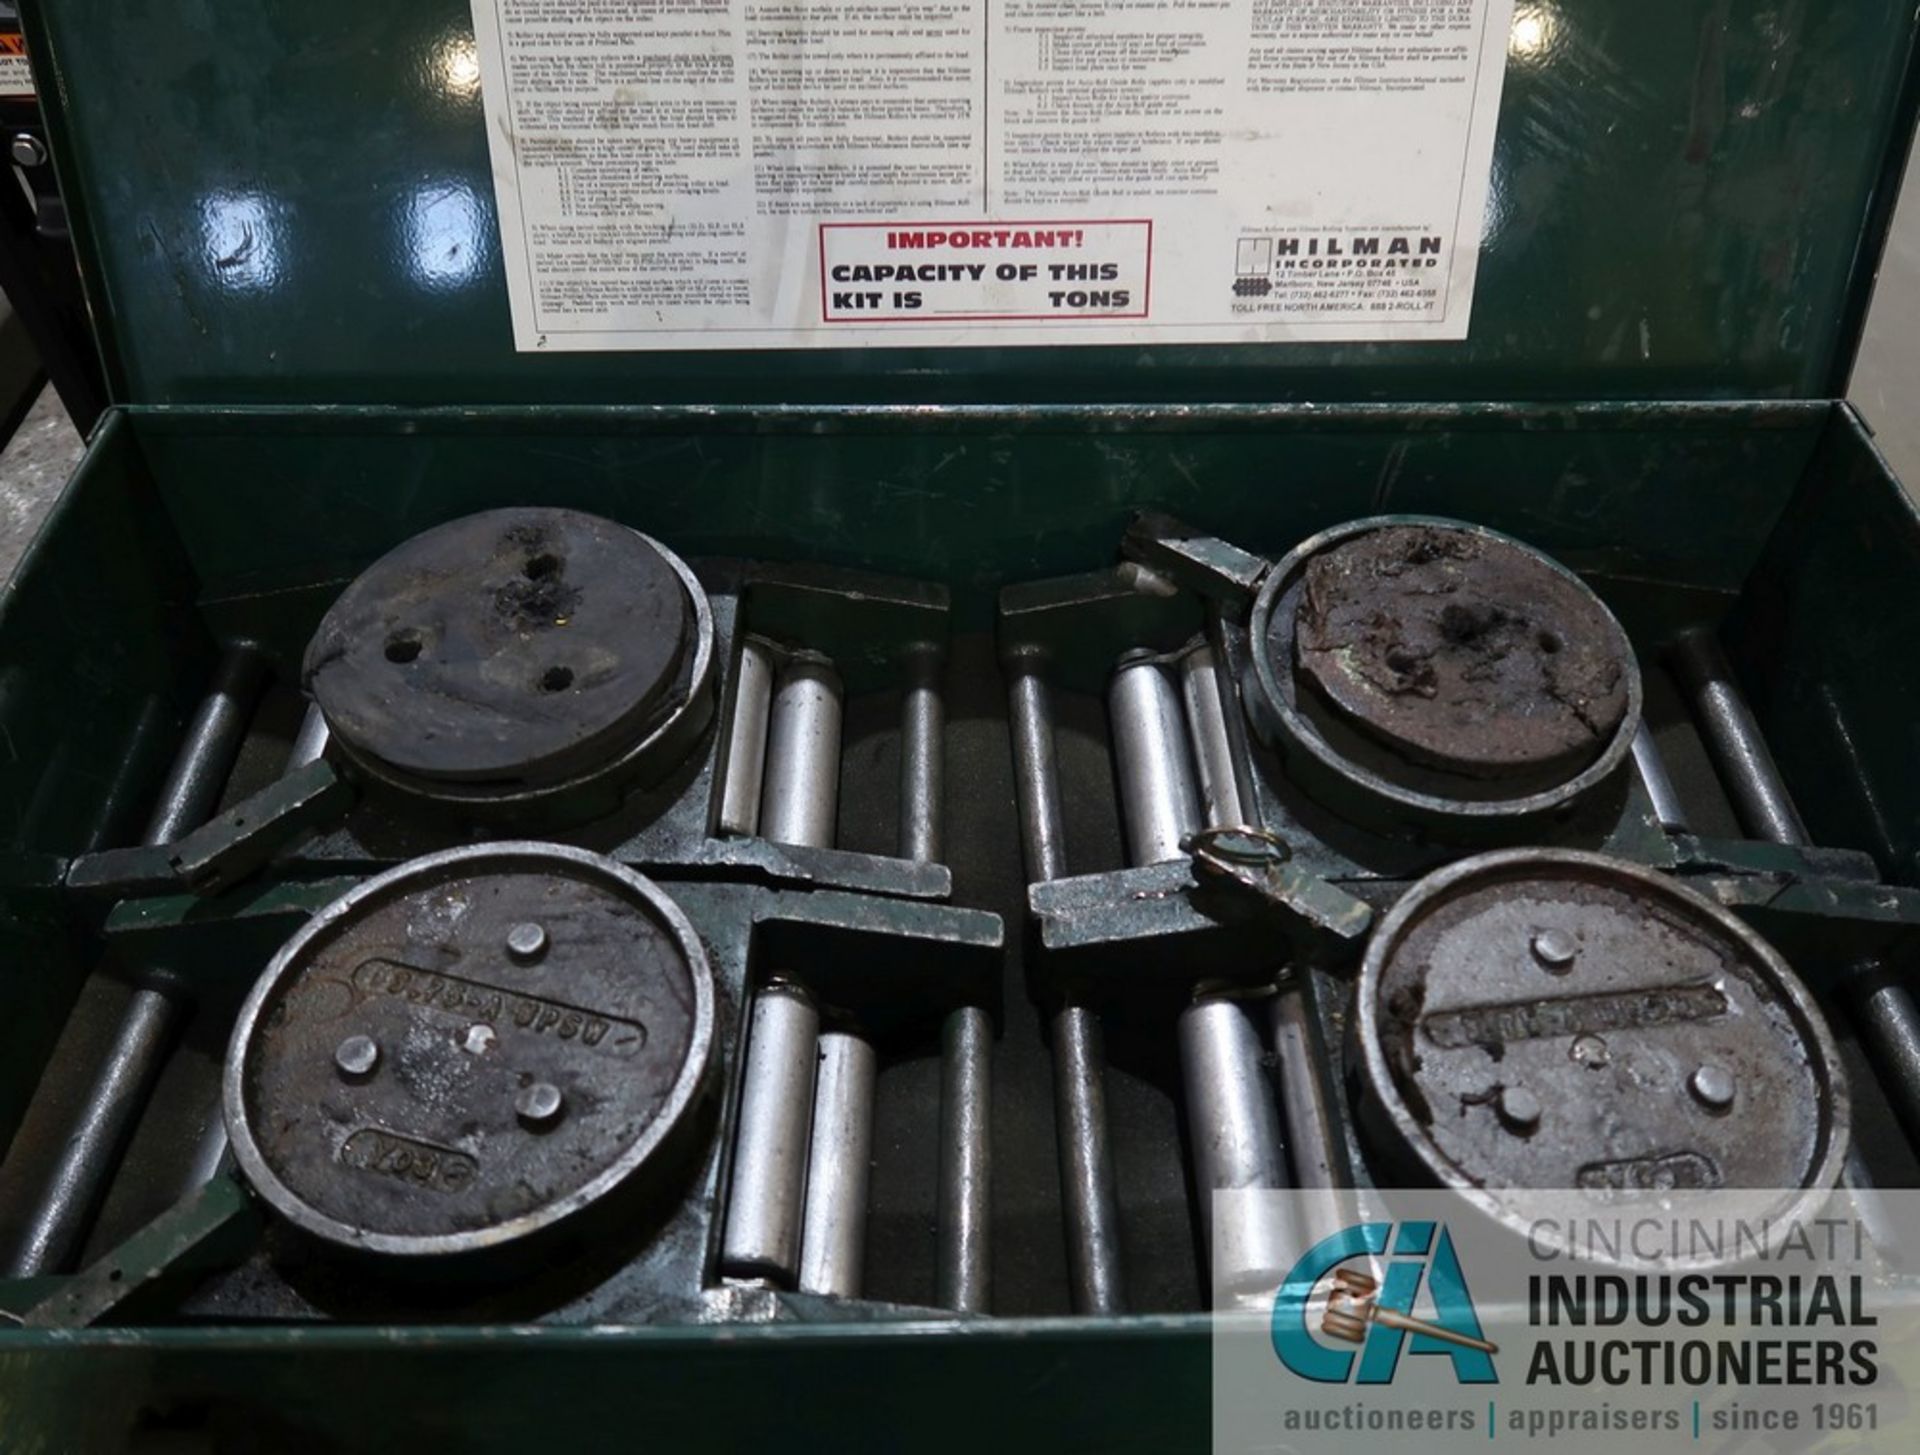 8 TON AND 3.75 TON CAPACITY HILLMAN DELUXE SET MACHINE ROLLERS WITH (2) STEER HANDLES - Image 2 of 3